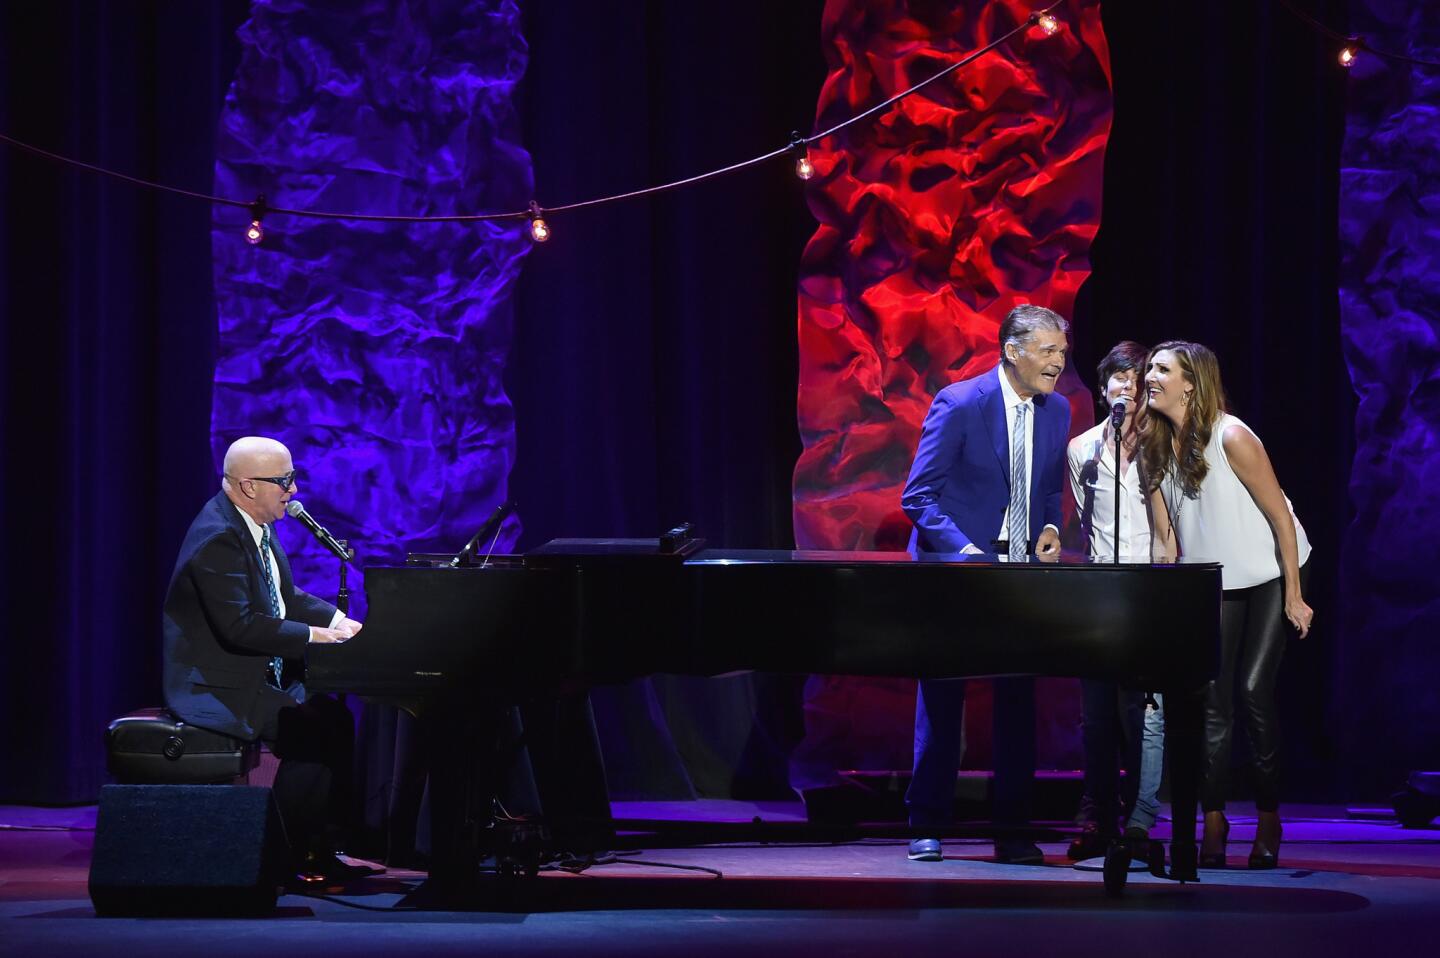 From left, Paul Shaffer, Fred Willard, Tig Notaro and Heather McDonald perform "It's Raining Men" to close out the event, which raised $600,000 for the International Myeloma Foundation.